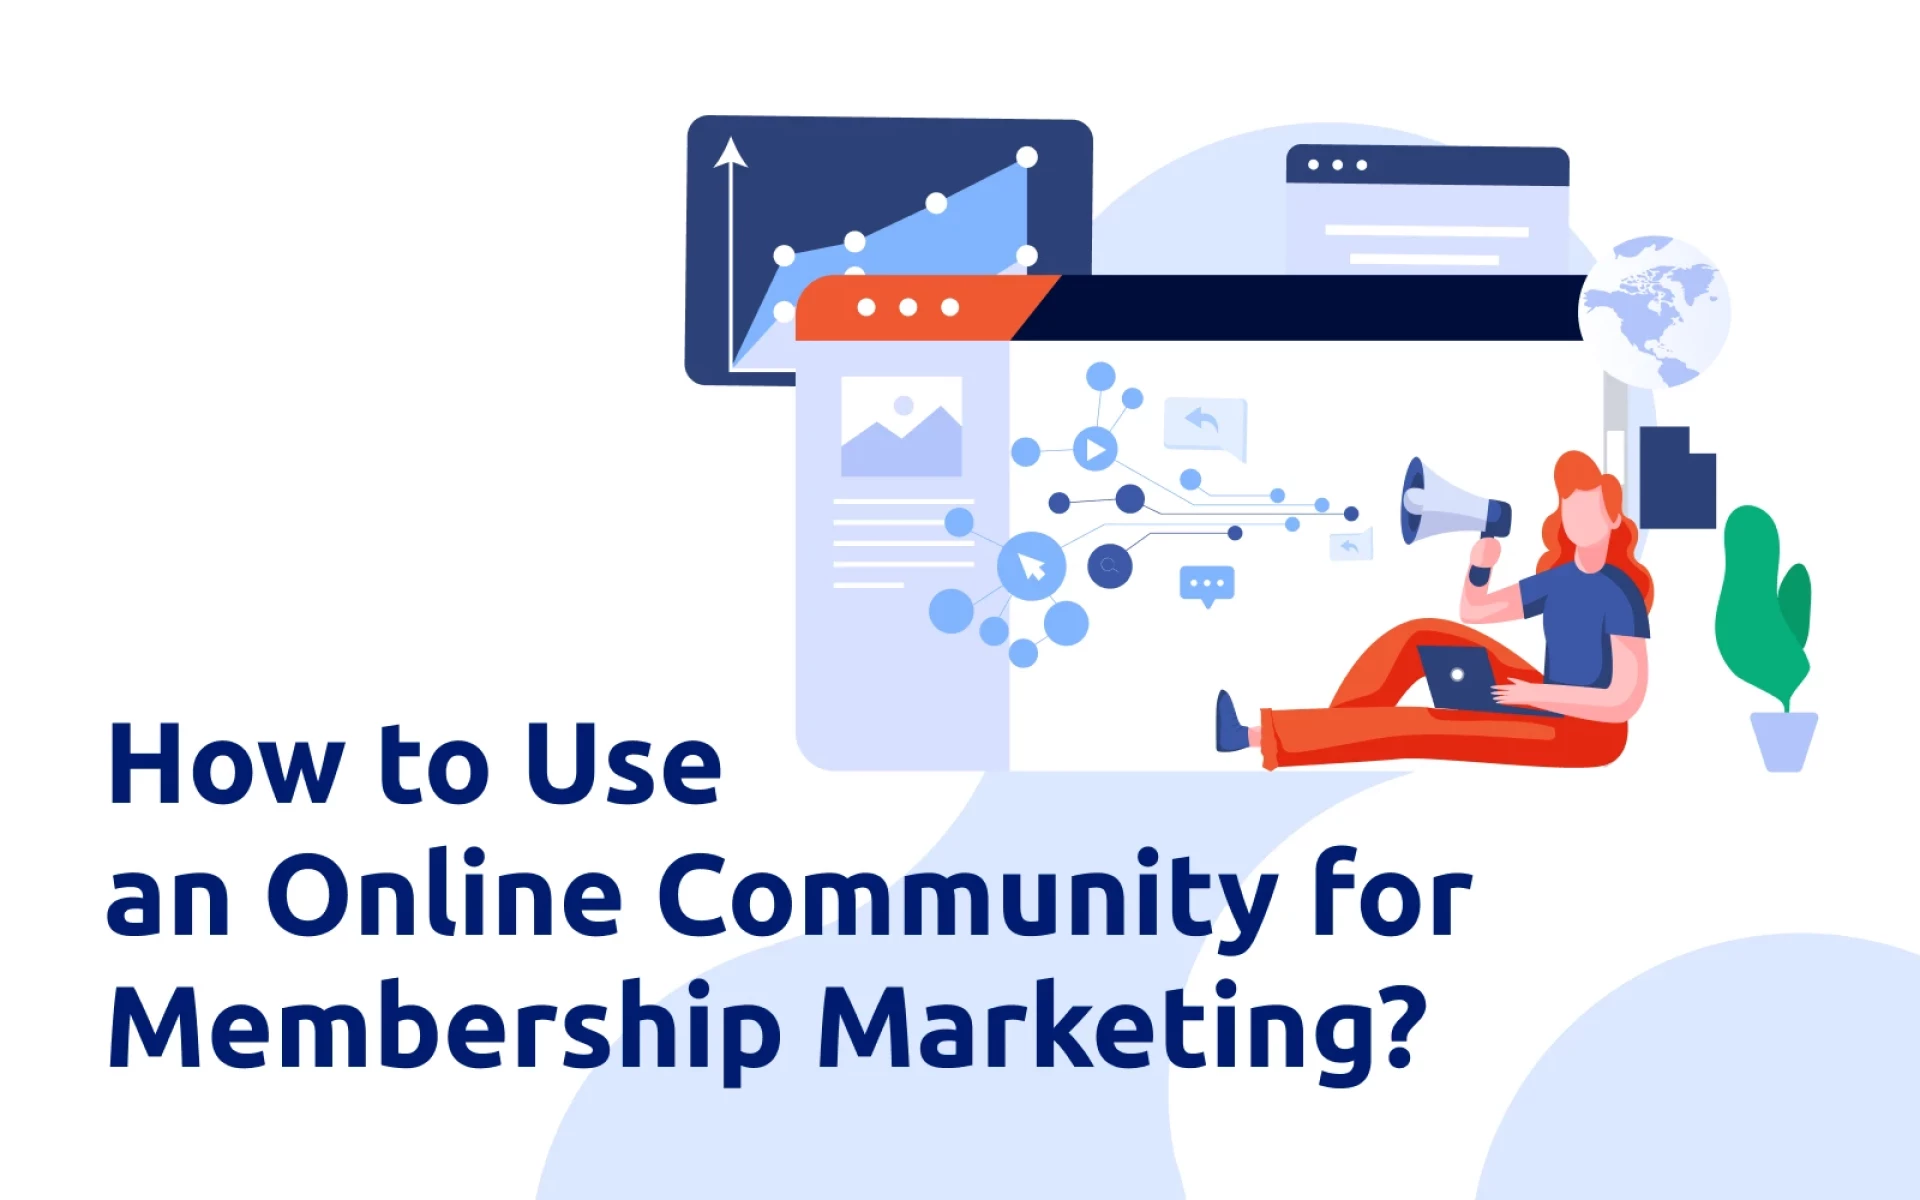 How to Use an Online Community for Membership Marketing?